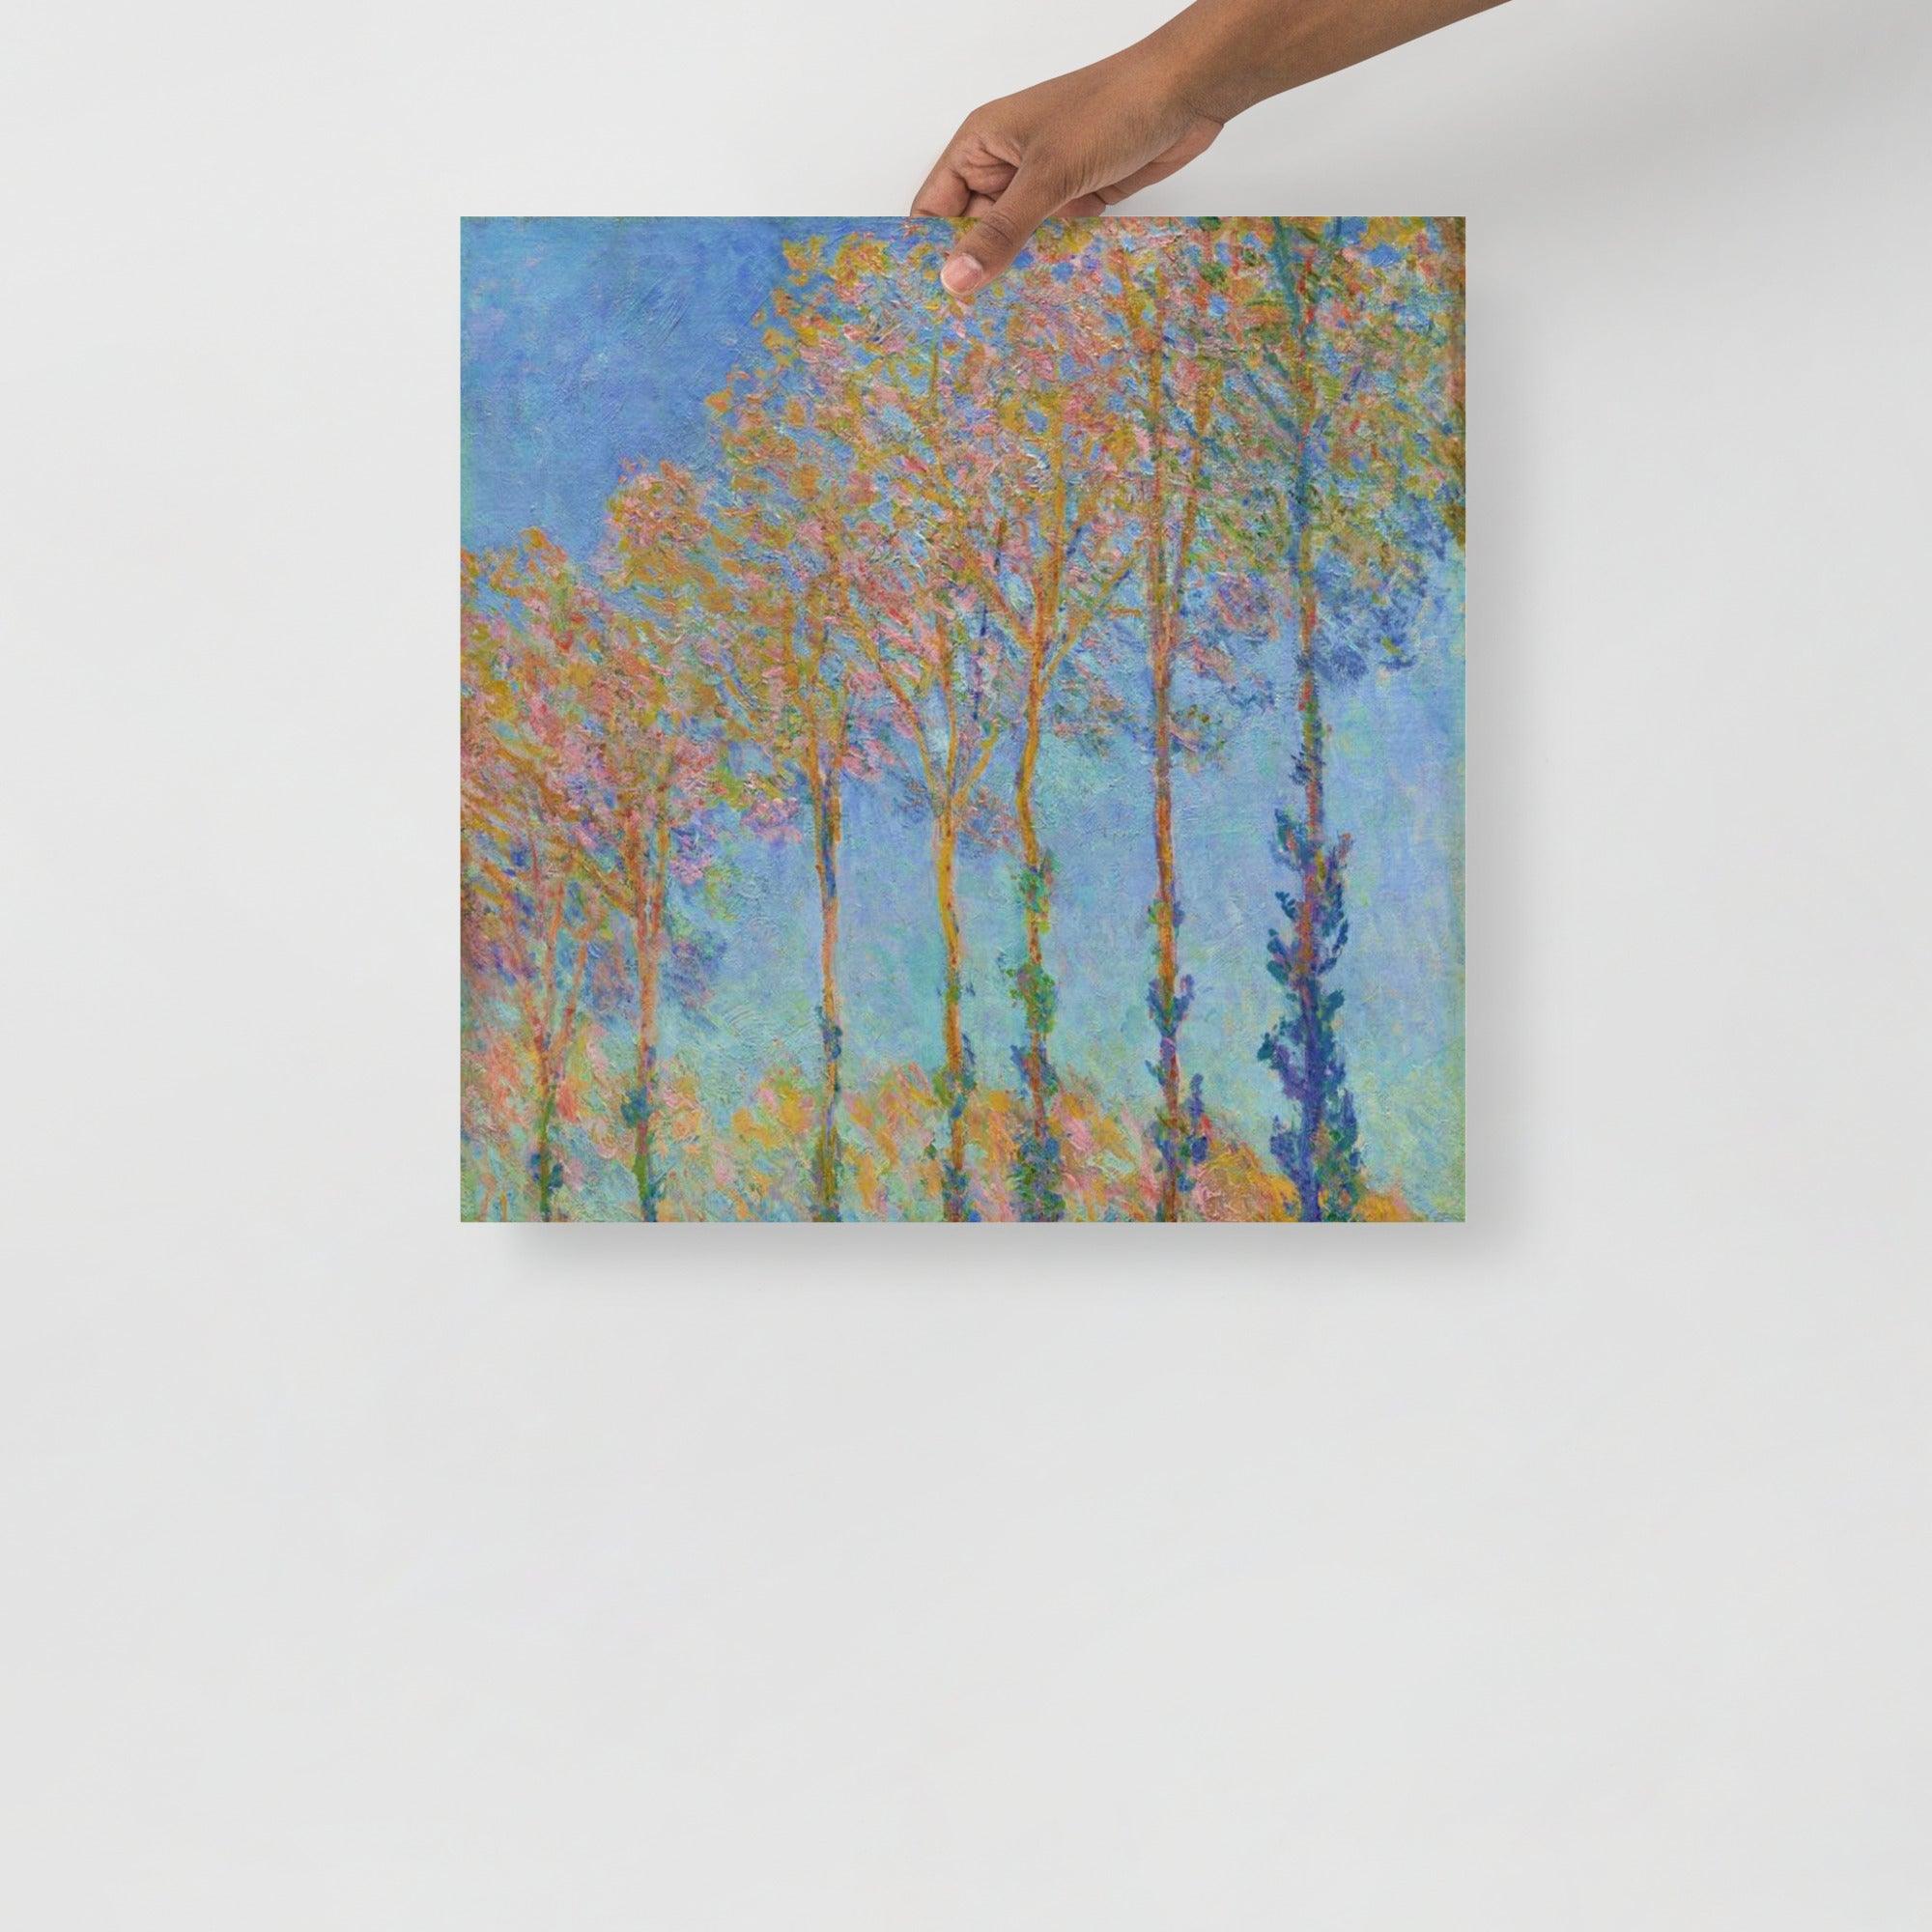 A Poplars on the Bank of the Epte River by Claude Monet poster on a plain backdrop in size 18x18”.